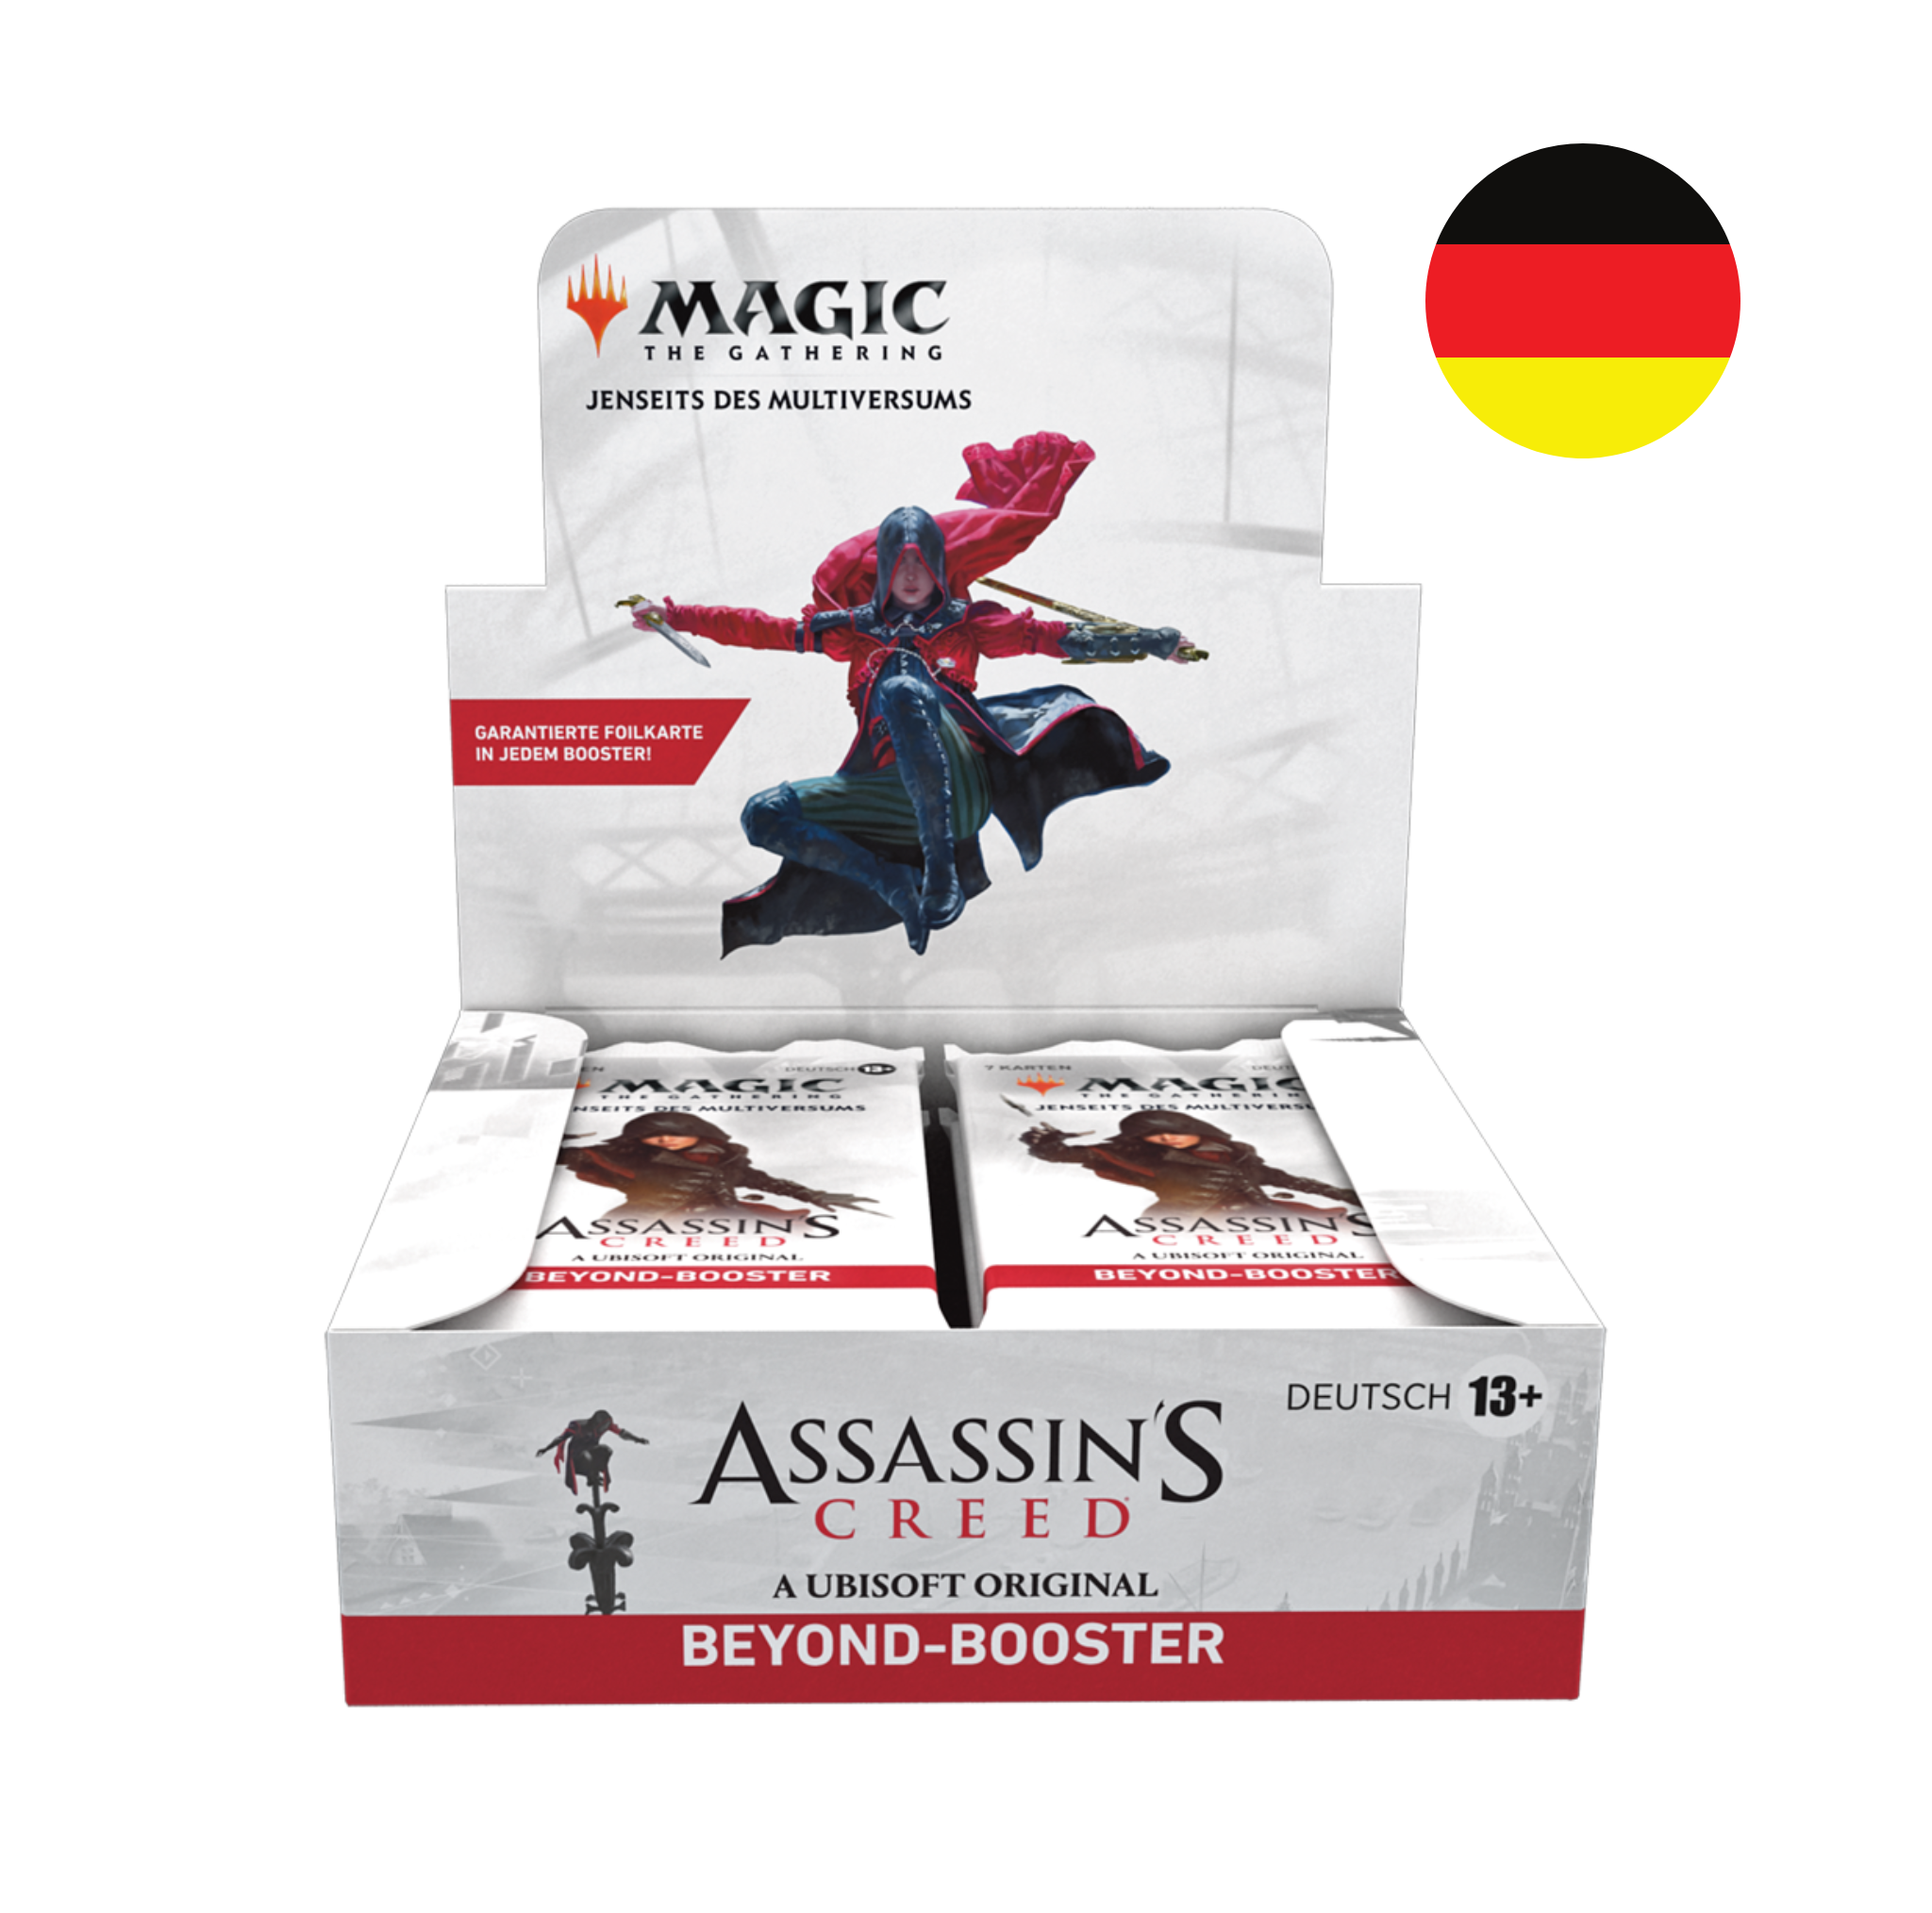 Magic: The Gathering - Jenseits des Multiversums: Assassin's Creed - Beyond-Booster-Display - DE